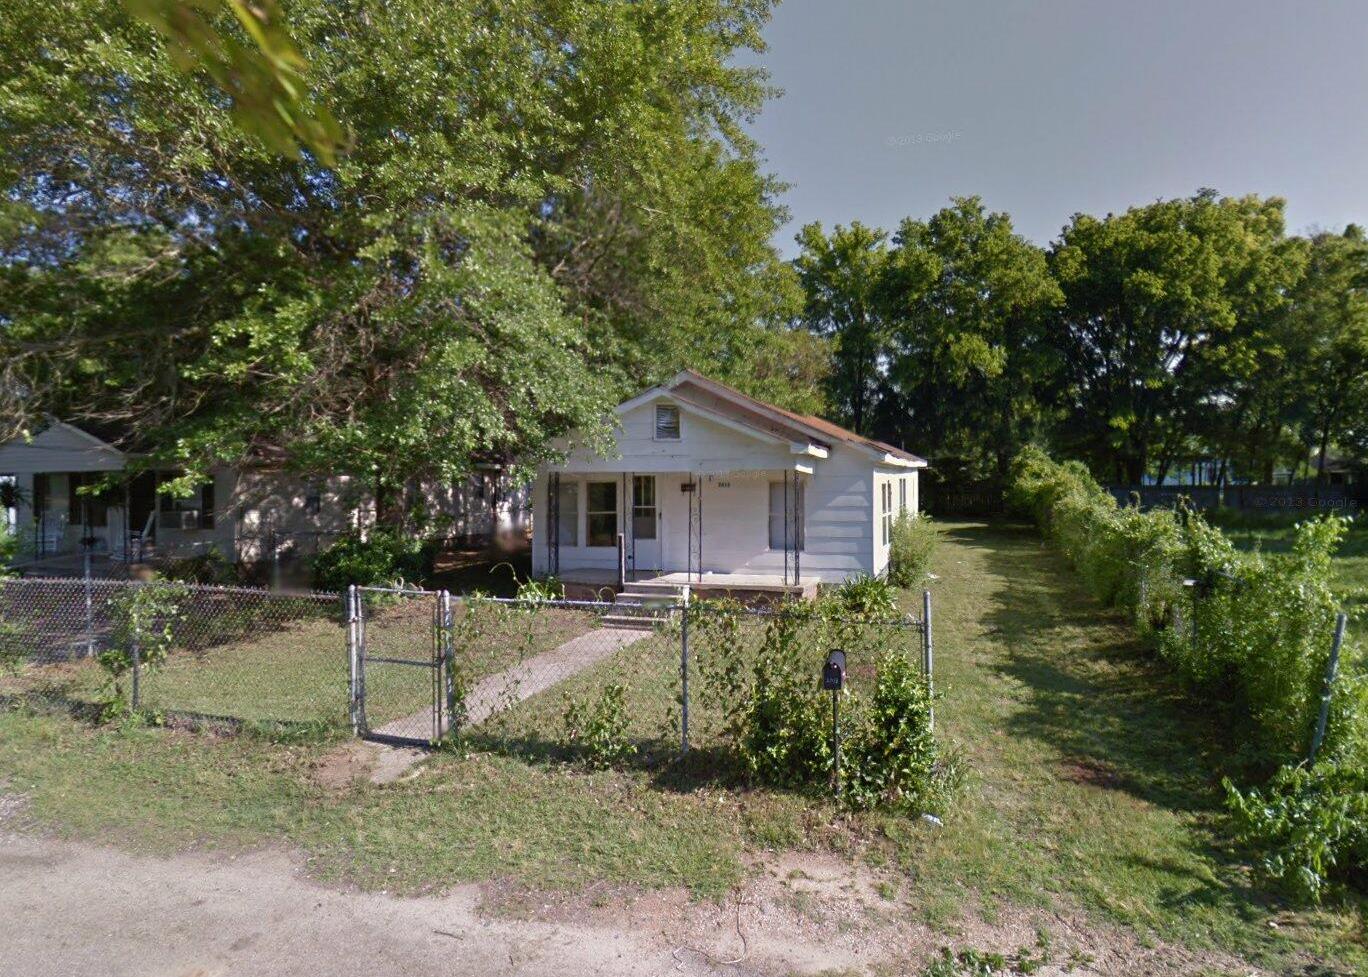 2413 5th Ave S, Columbus MS Pre-foreclosure Property